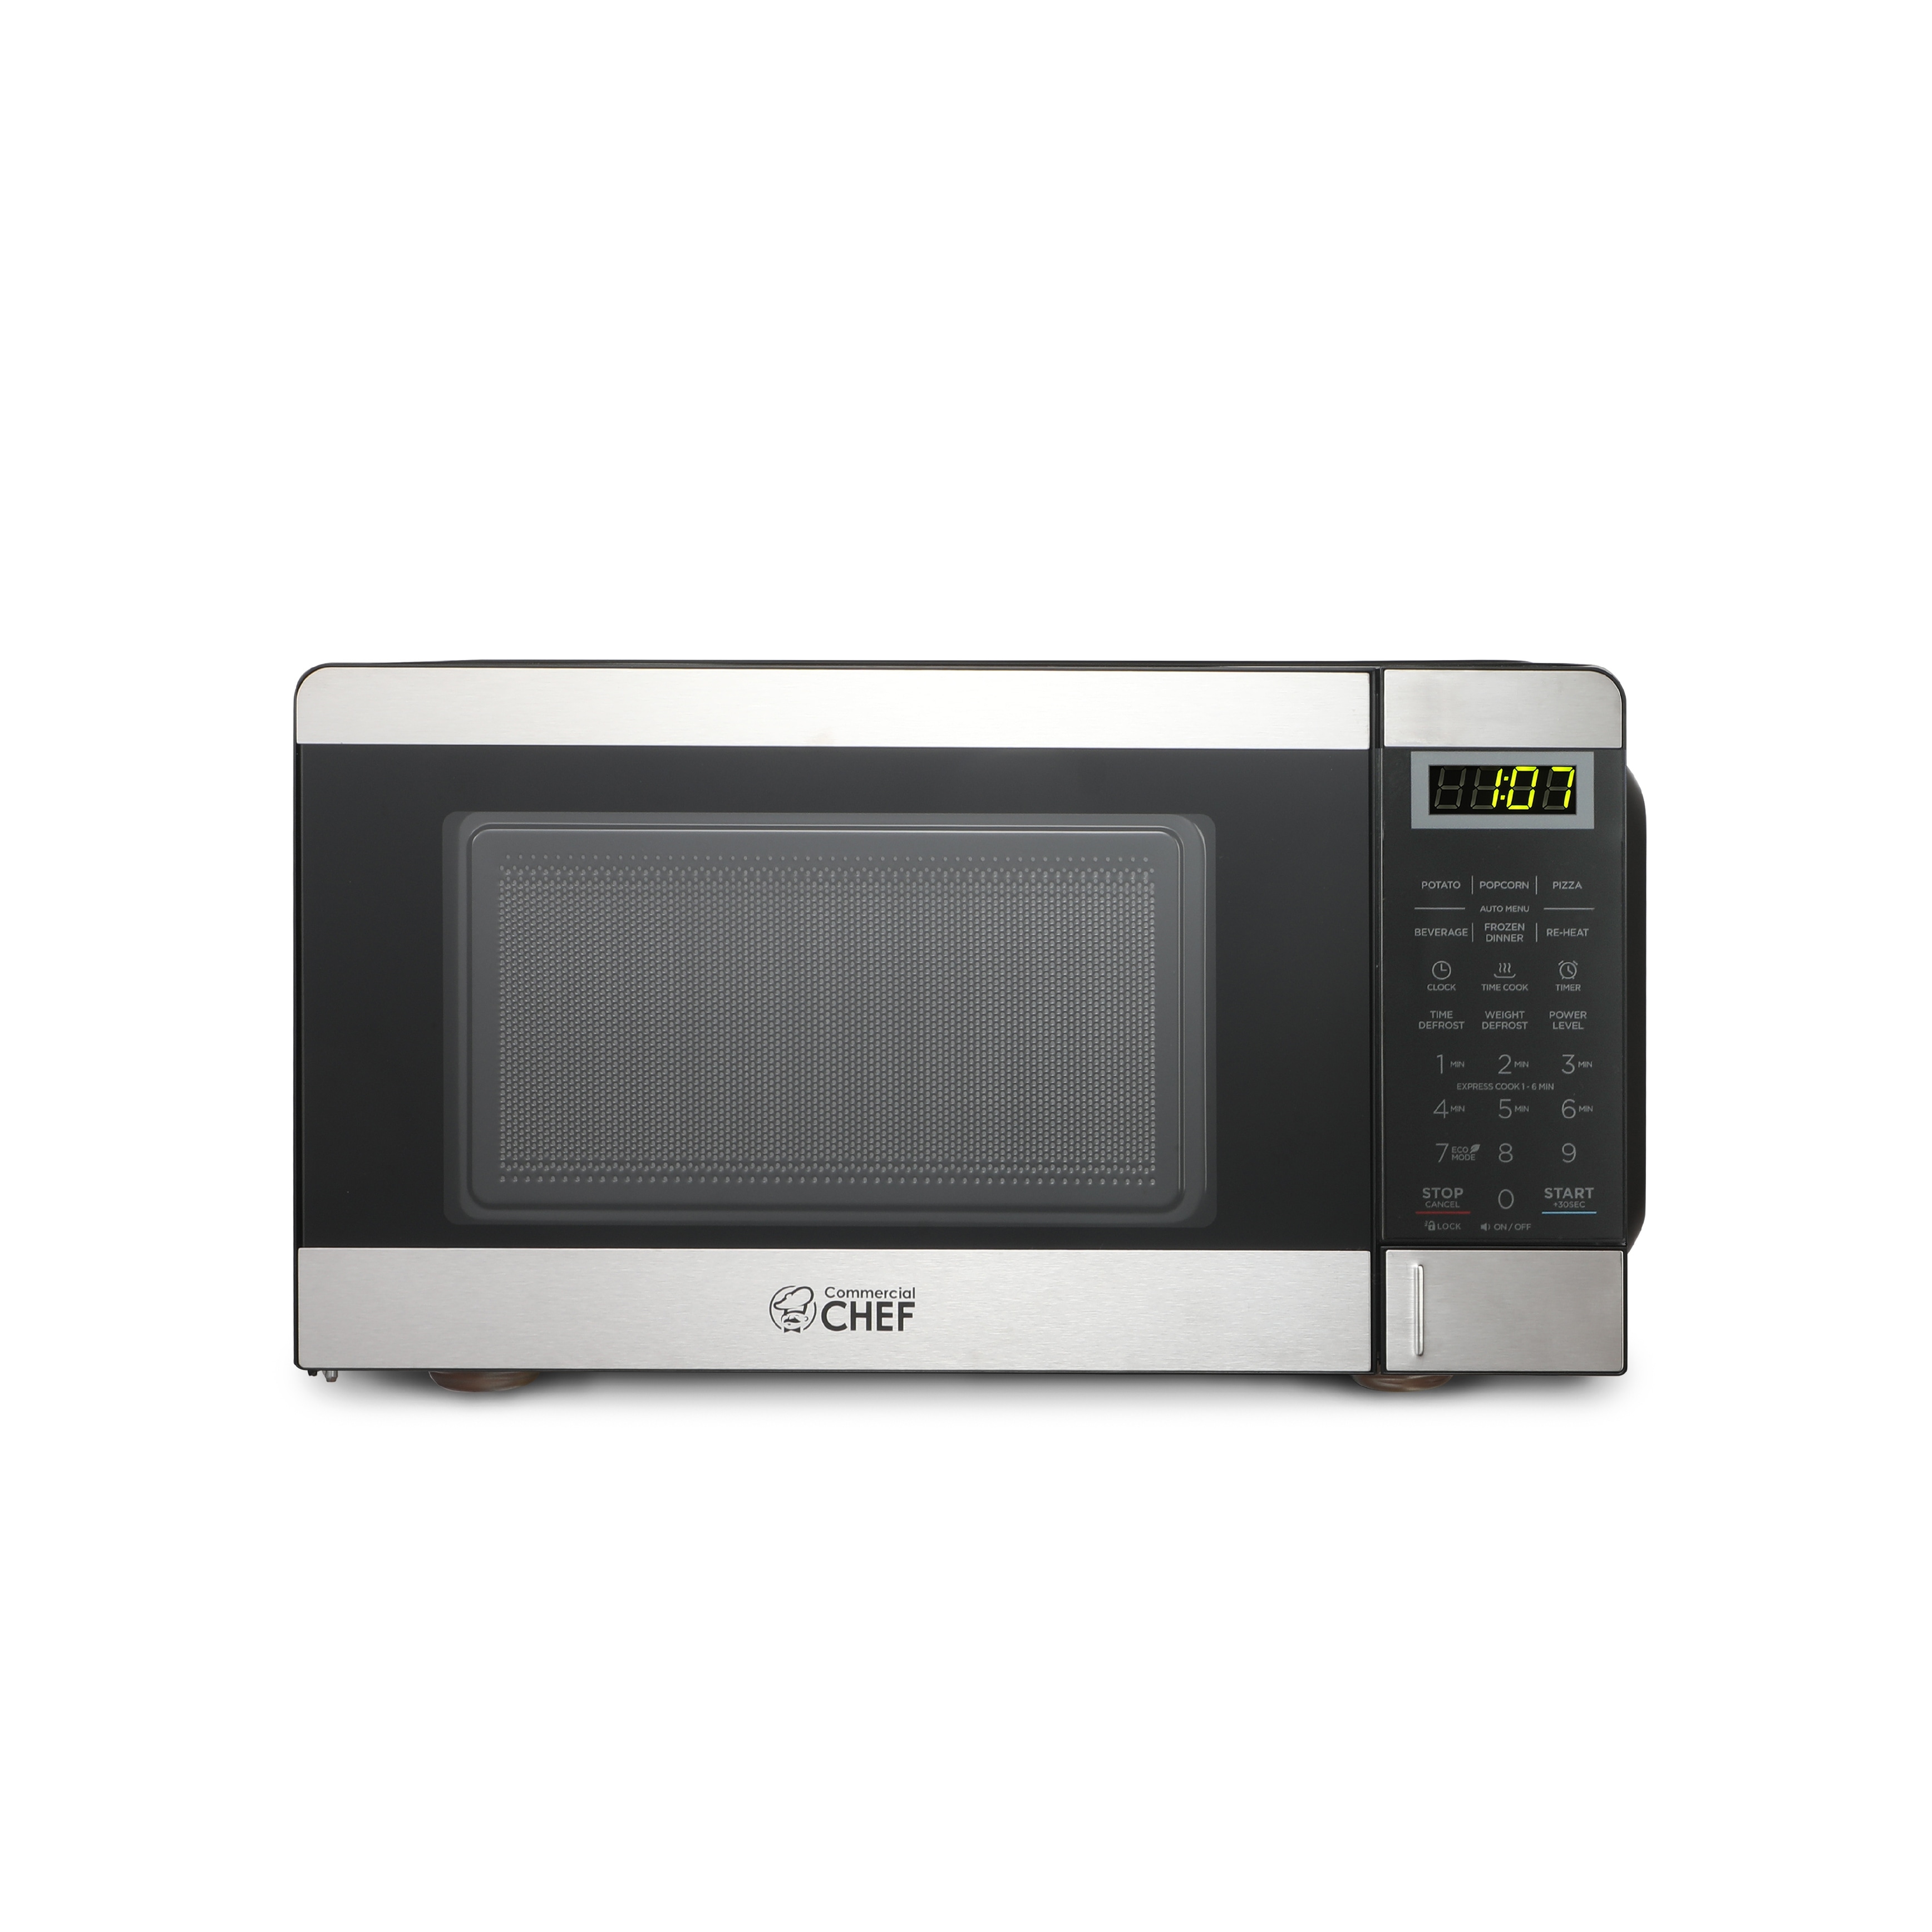 https://ak1.ostkcdn.com/images/products/is/images/direct/85ceed134bdc5afba0e1b9d90dd7aebaa44e6c9b/Commercial-Chef-Countertop-Microwave-Oven%2C-0.7-Cubic-Feet%2C-Stainless-Steel.jpg